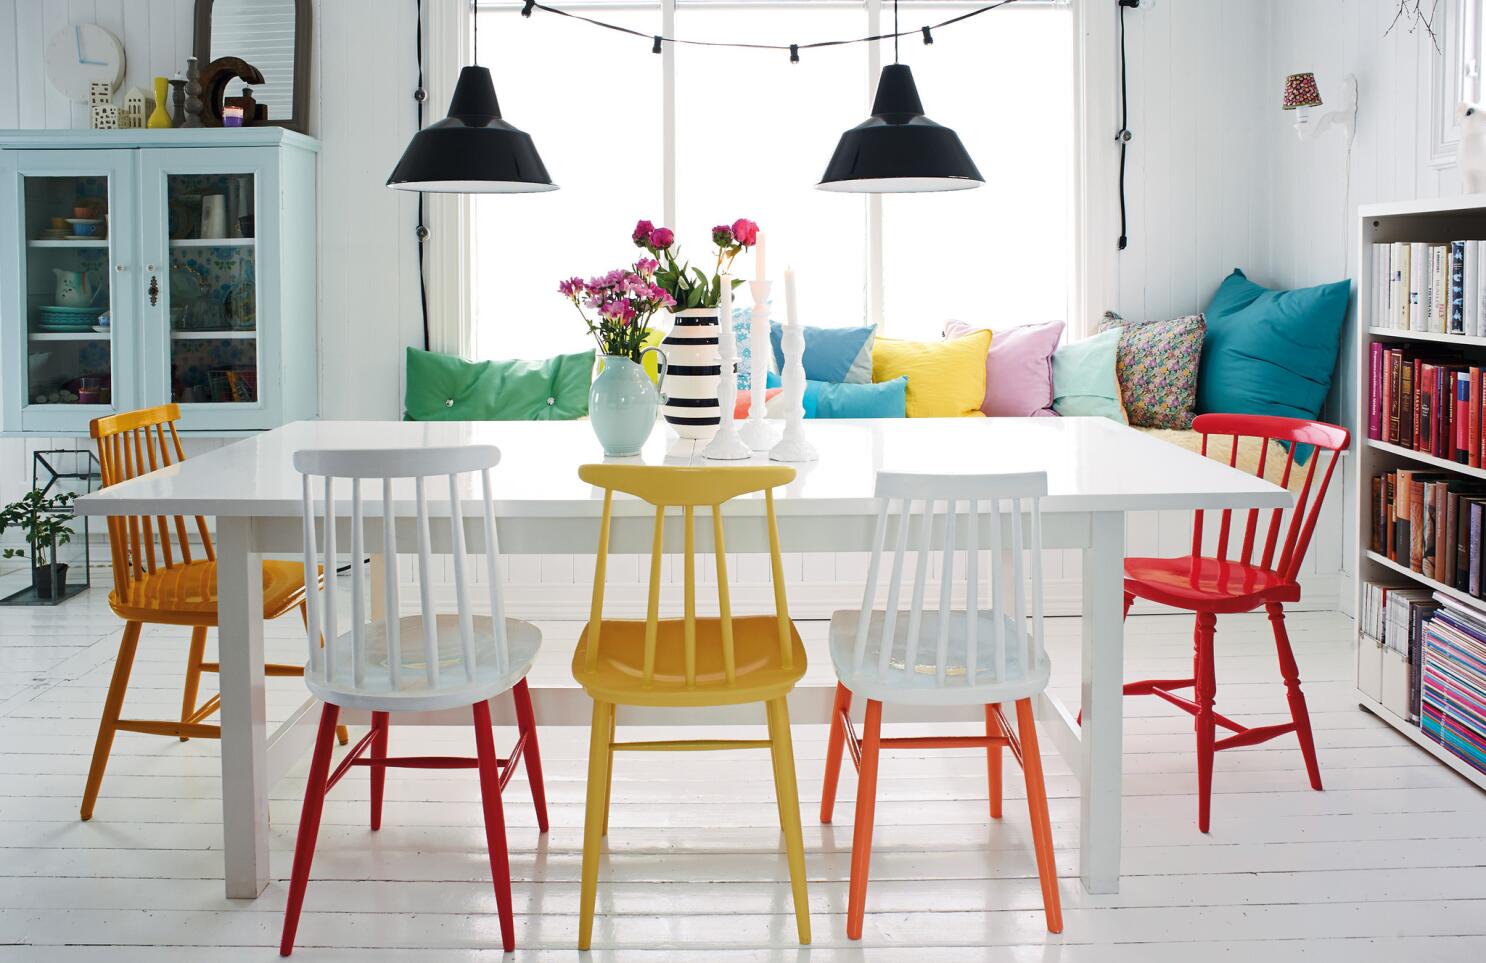 Colour Advice: How To Decorate With Lime Green - Bright Bazaar by Will  Taylor